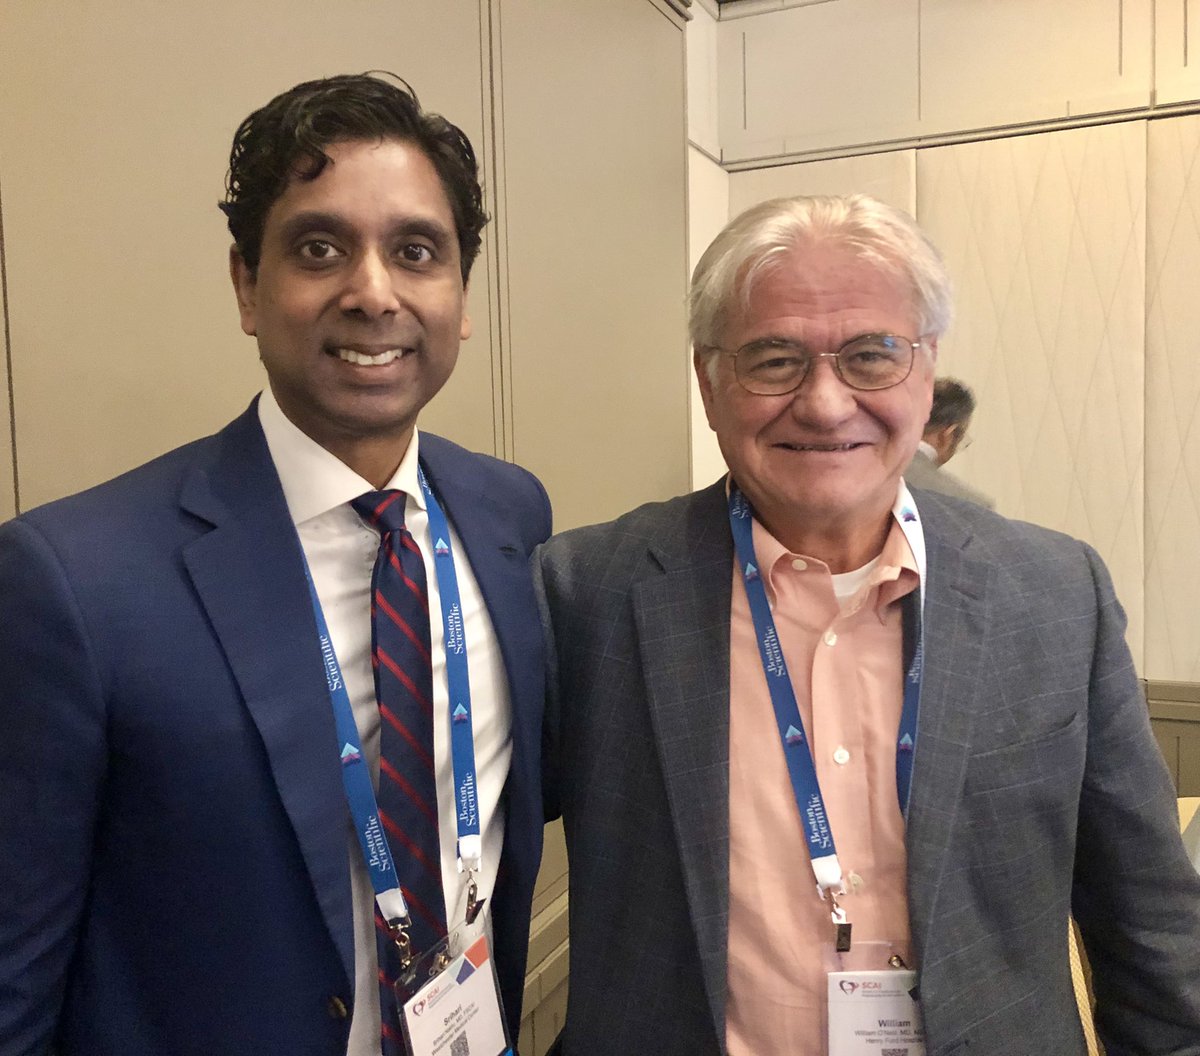 From my early days working on shock and HR PCI with @Abiomed, to starting @scaielm, to @SCAI SHOCK and sitting on @GruentzigSoc board together this man has been a tremendous mentor, inspiration and friend. Thank you @BillONeillMD